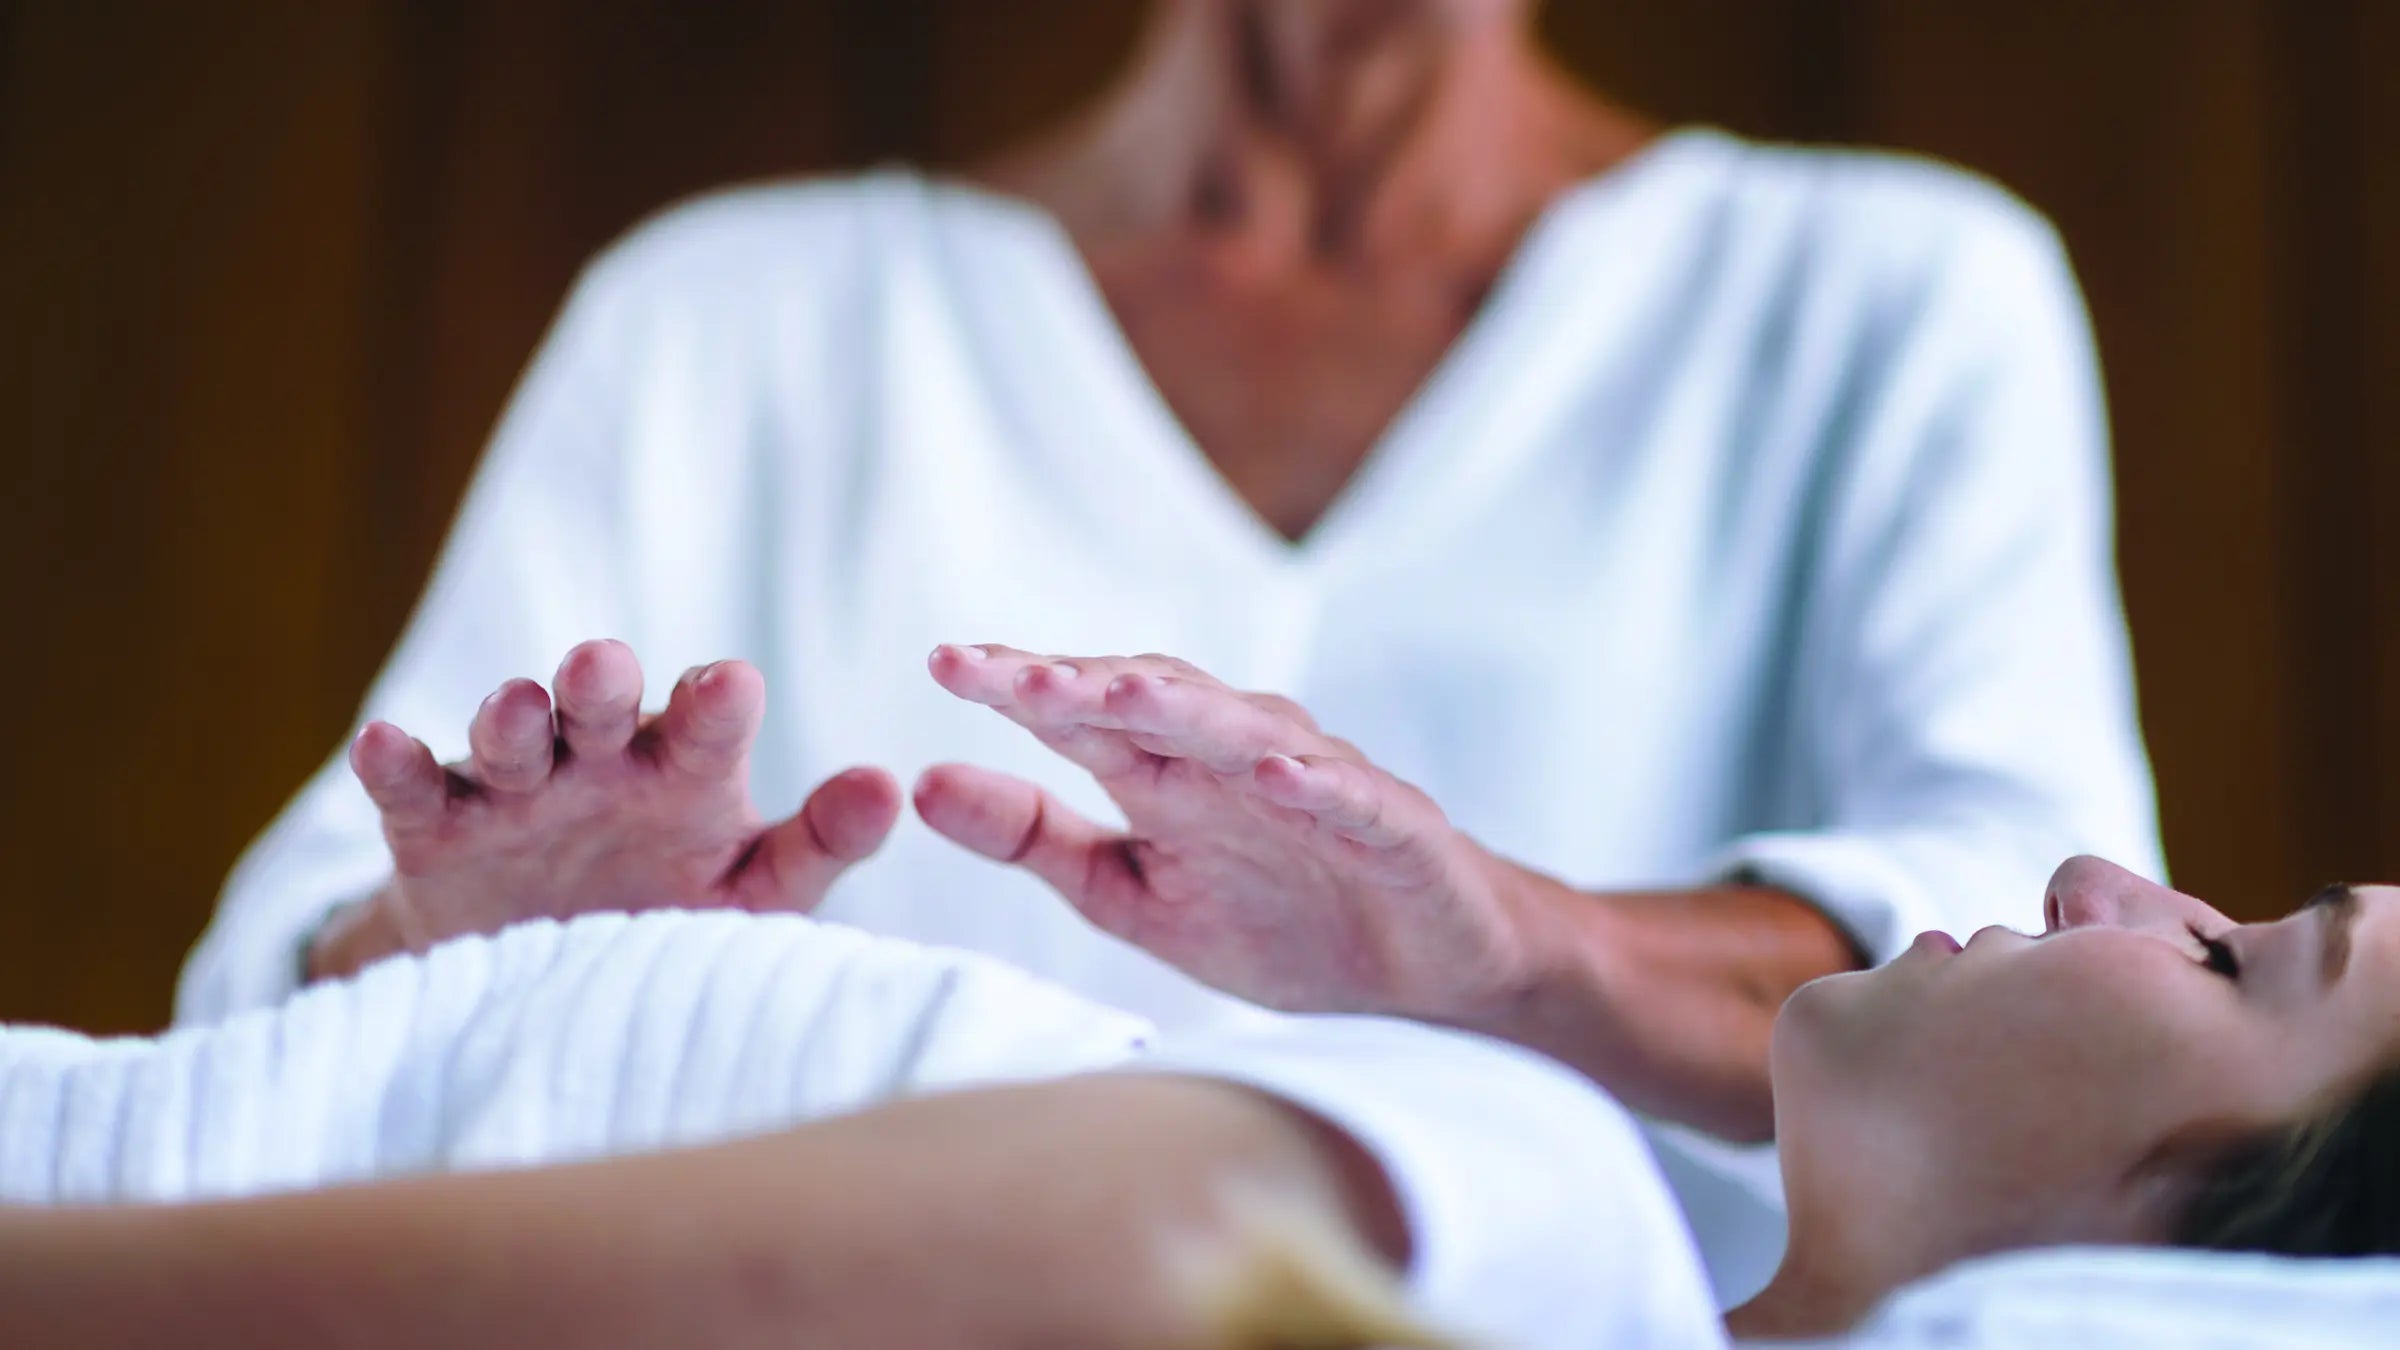 What Is Reiki And How Does It Work?